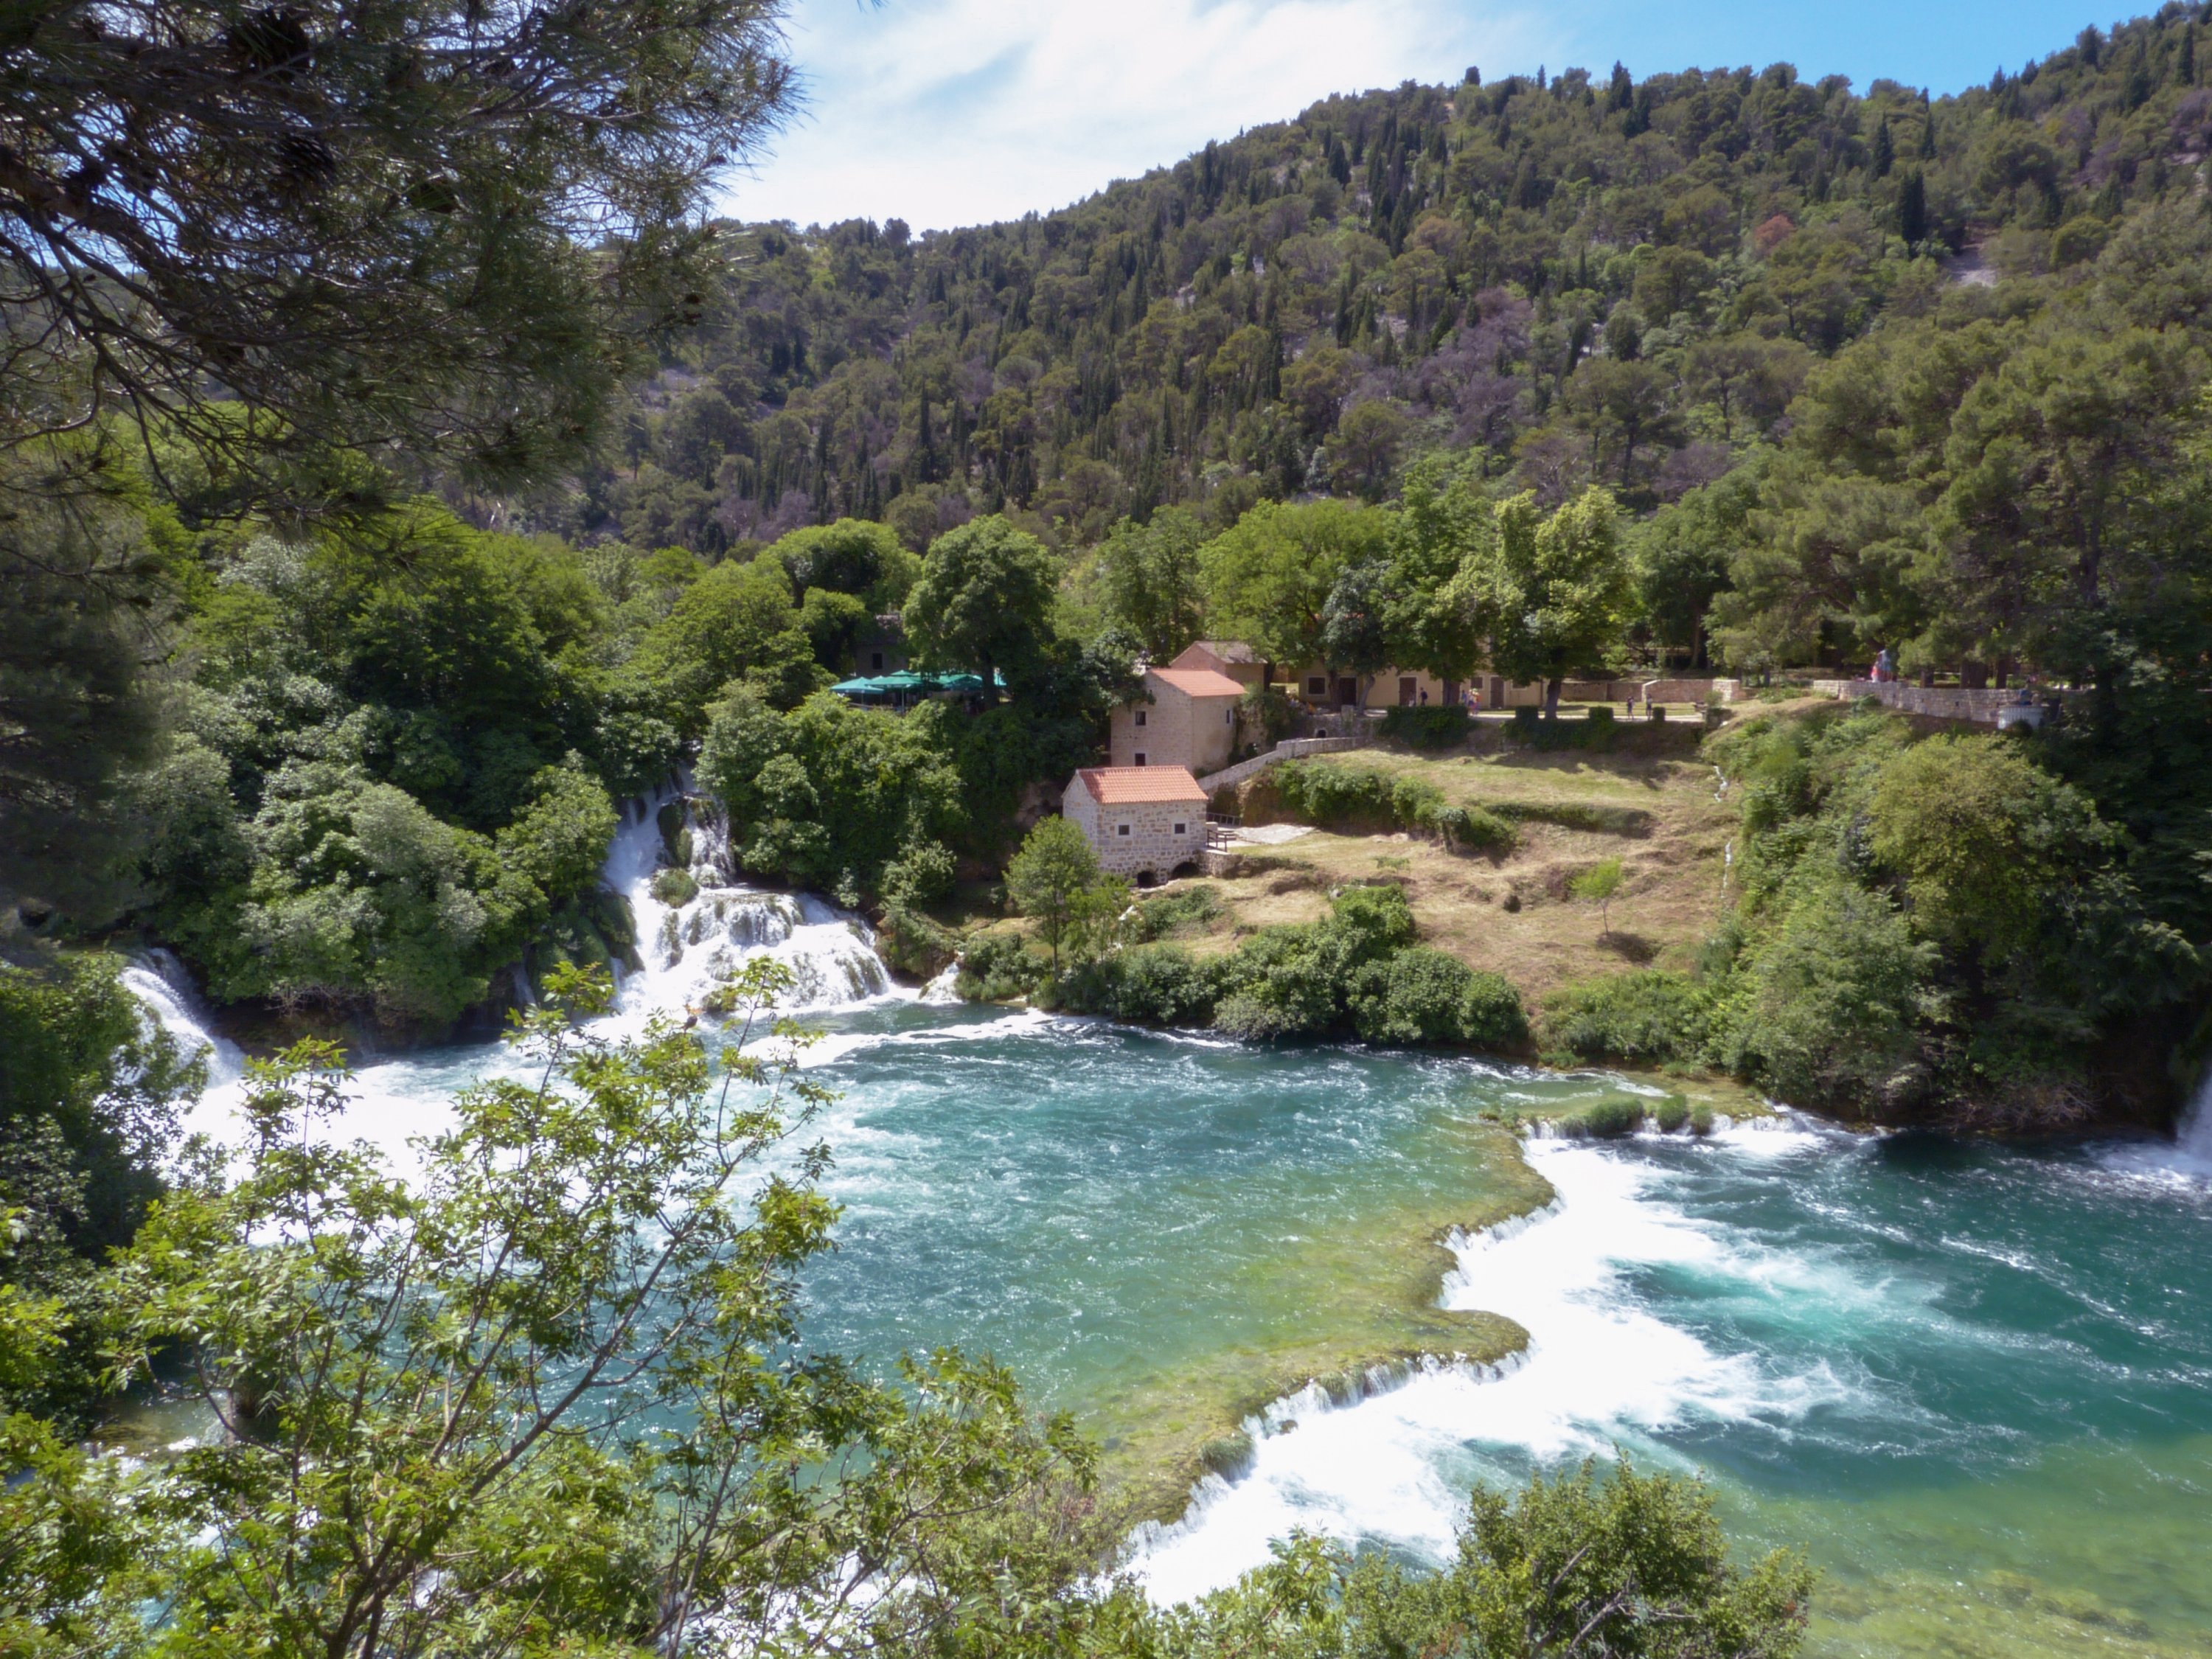 The rapids and cascades of the Krka River in Croatia have grown out of the limestone travertine over thousands of years. (Florian Sanktjohanser/dpa Photo) 